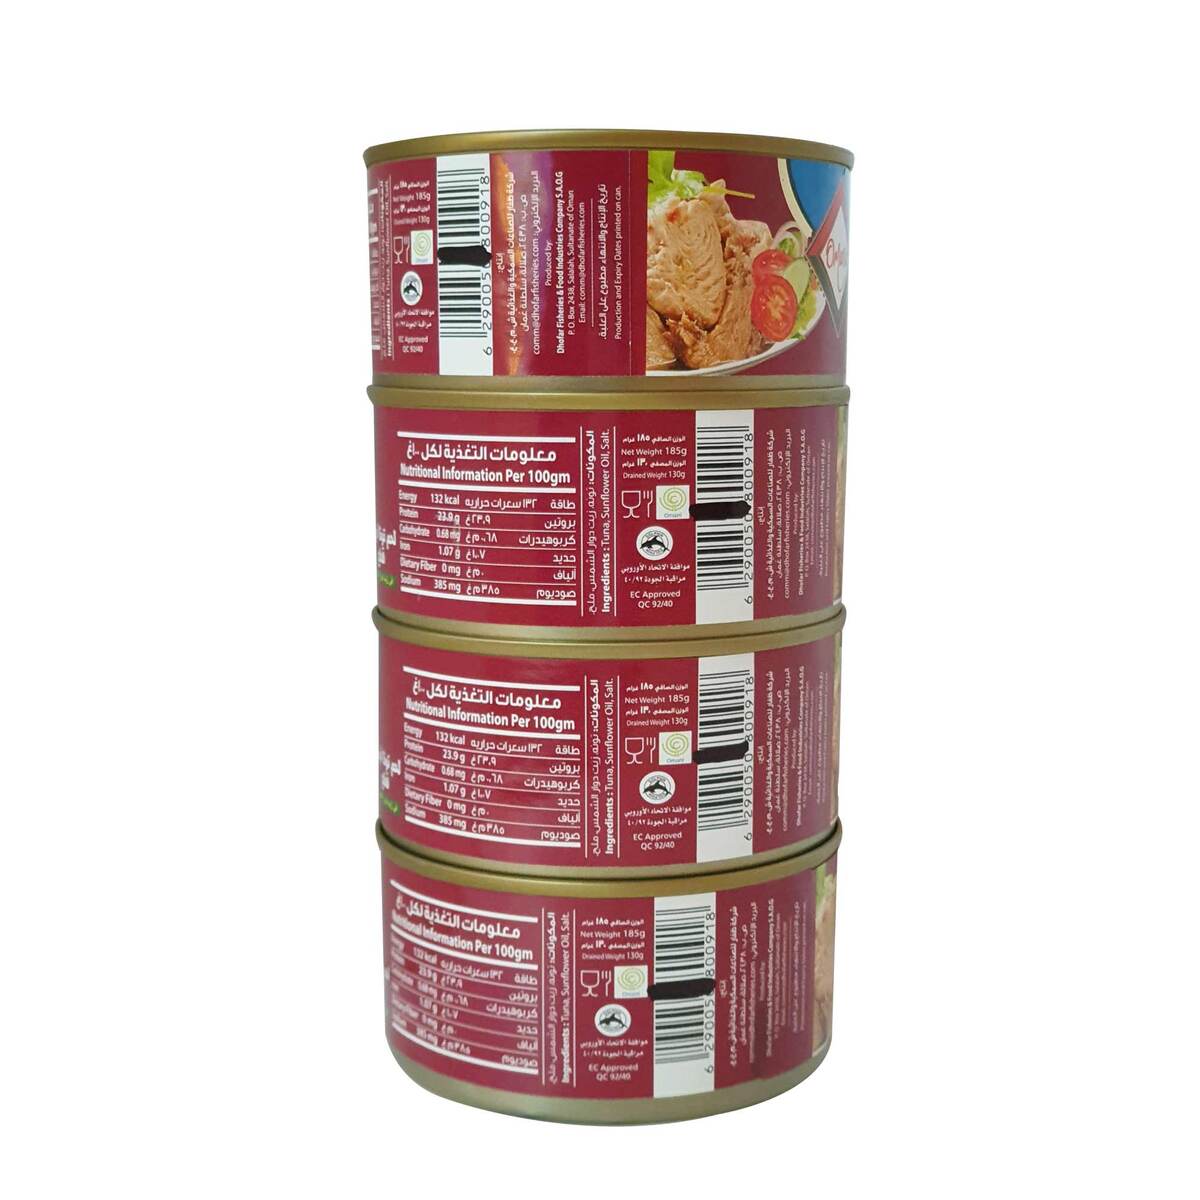 Omania White Meat Tuna Chunks In Sunflower Oil Value Pack 4 x 185g